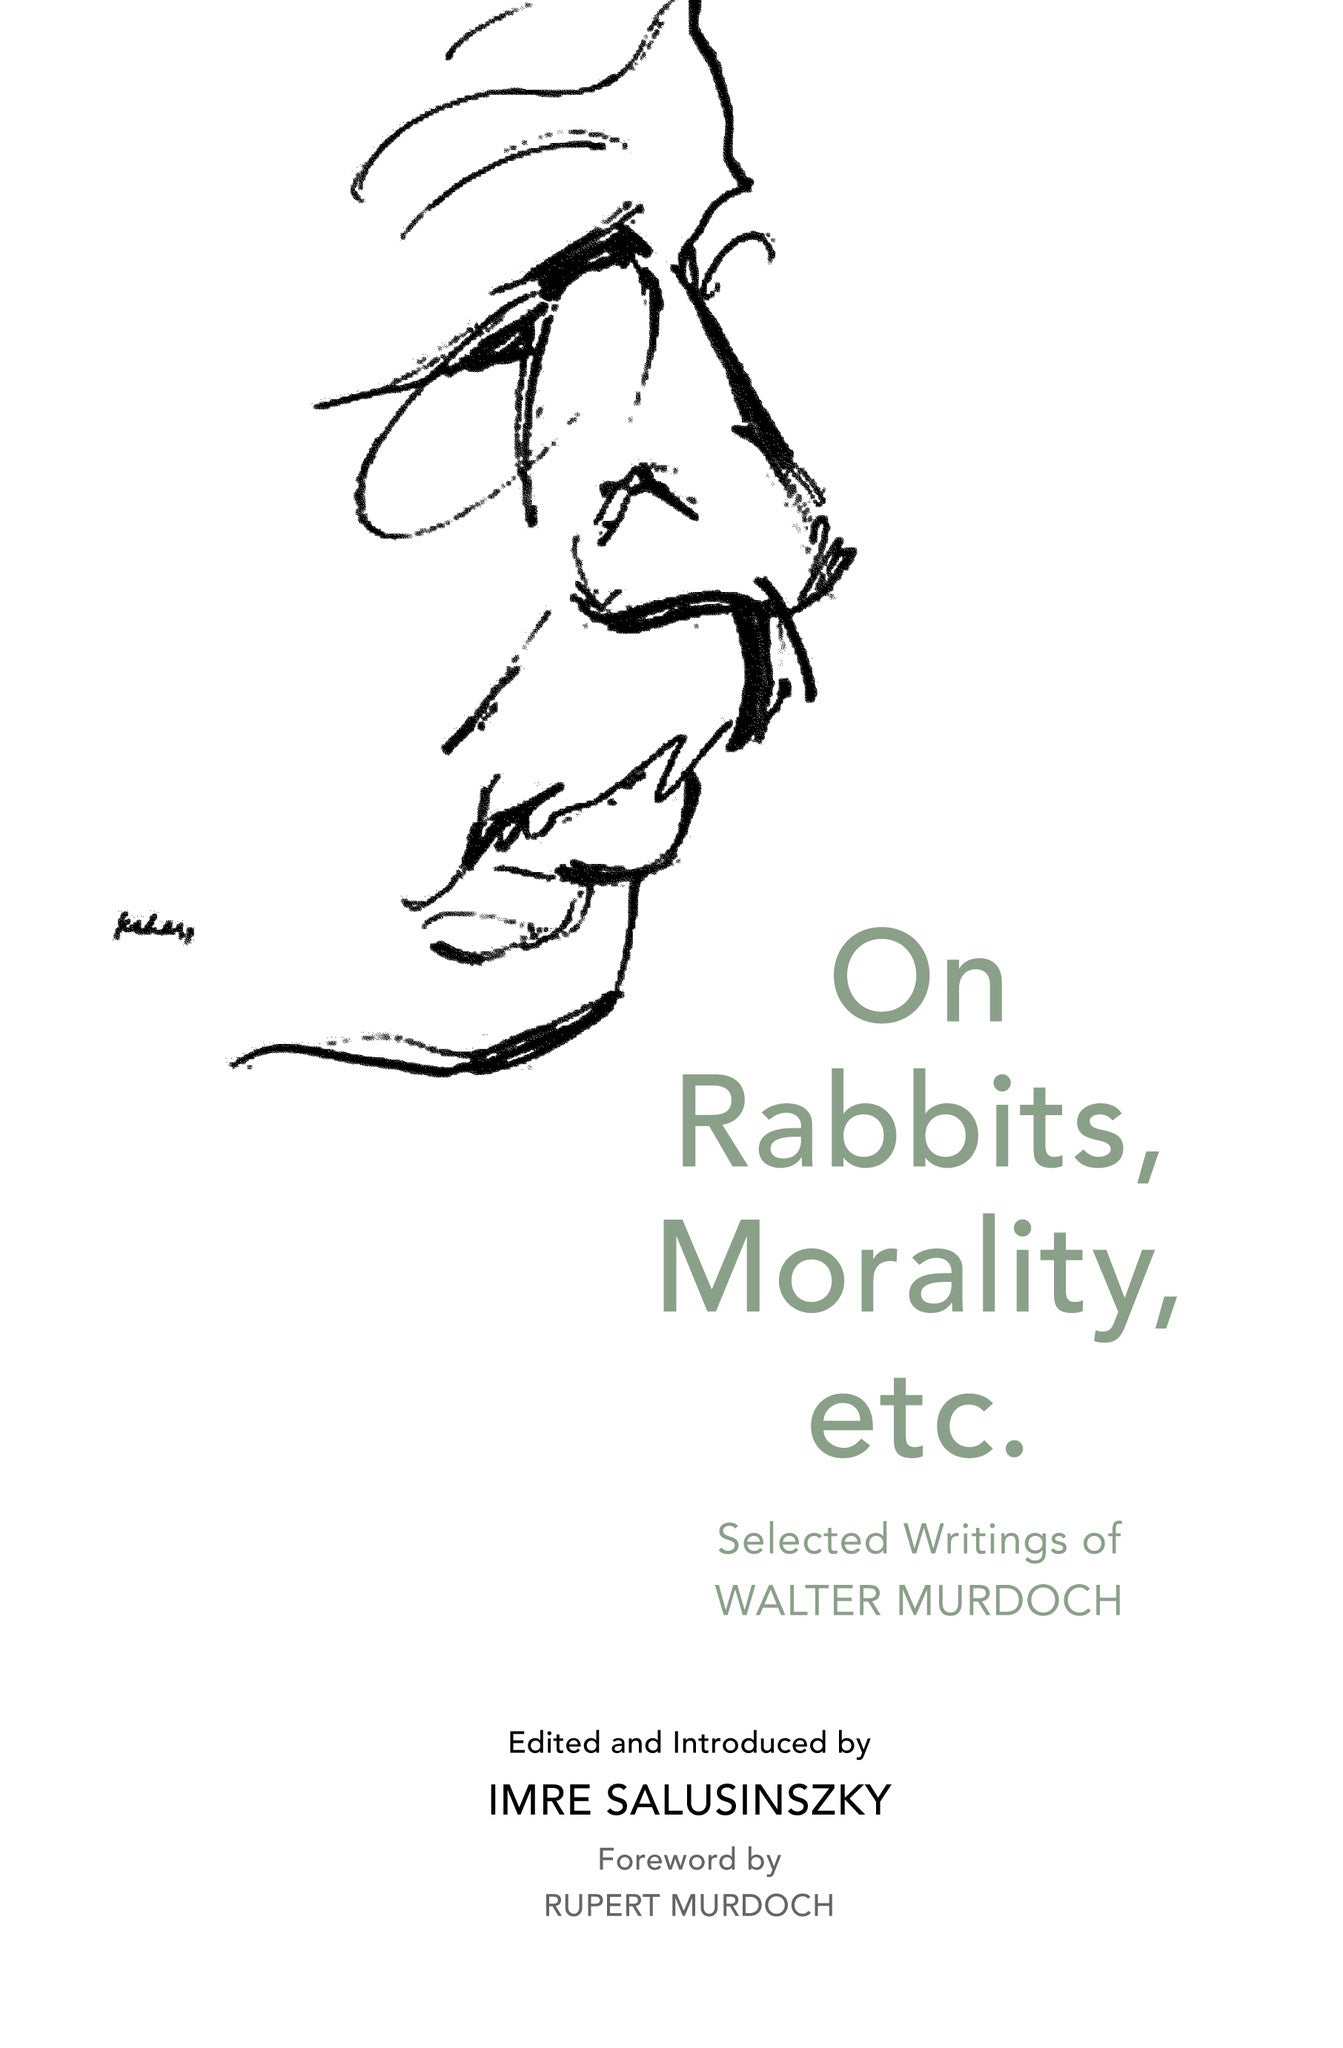 On Rabbits, Morality, etc.: Selected Writings of Walter Murdoch